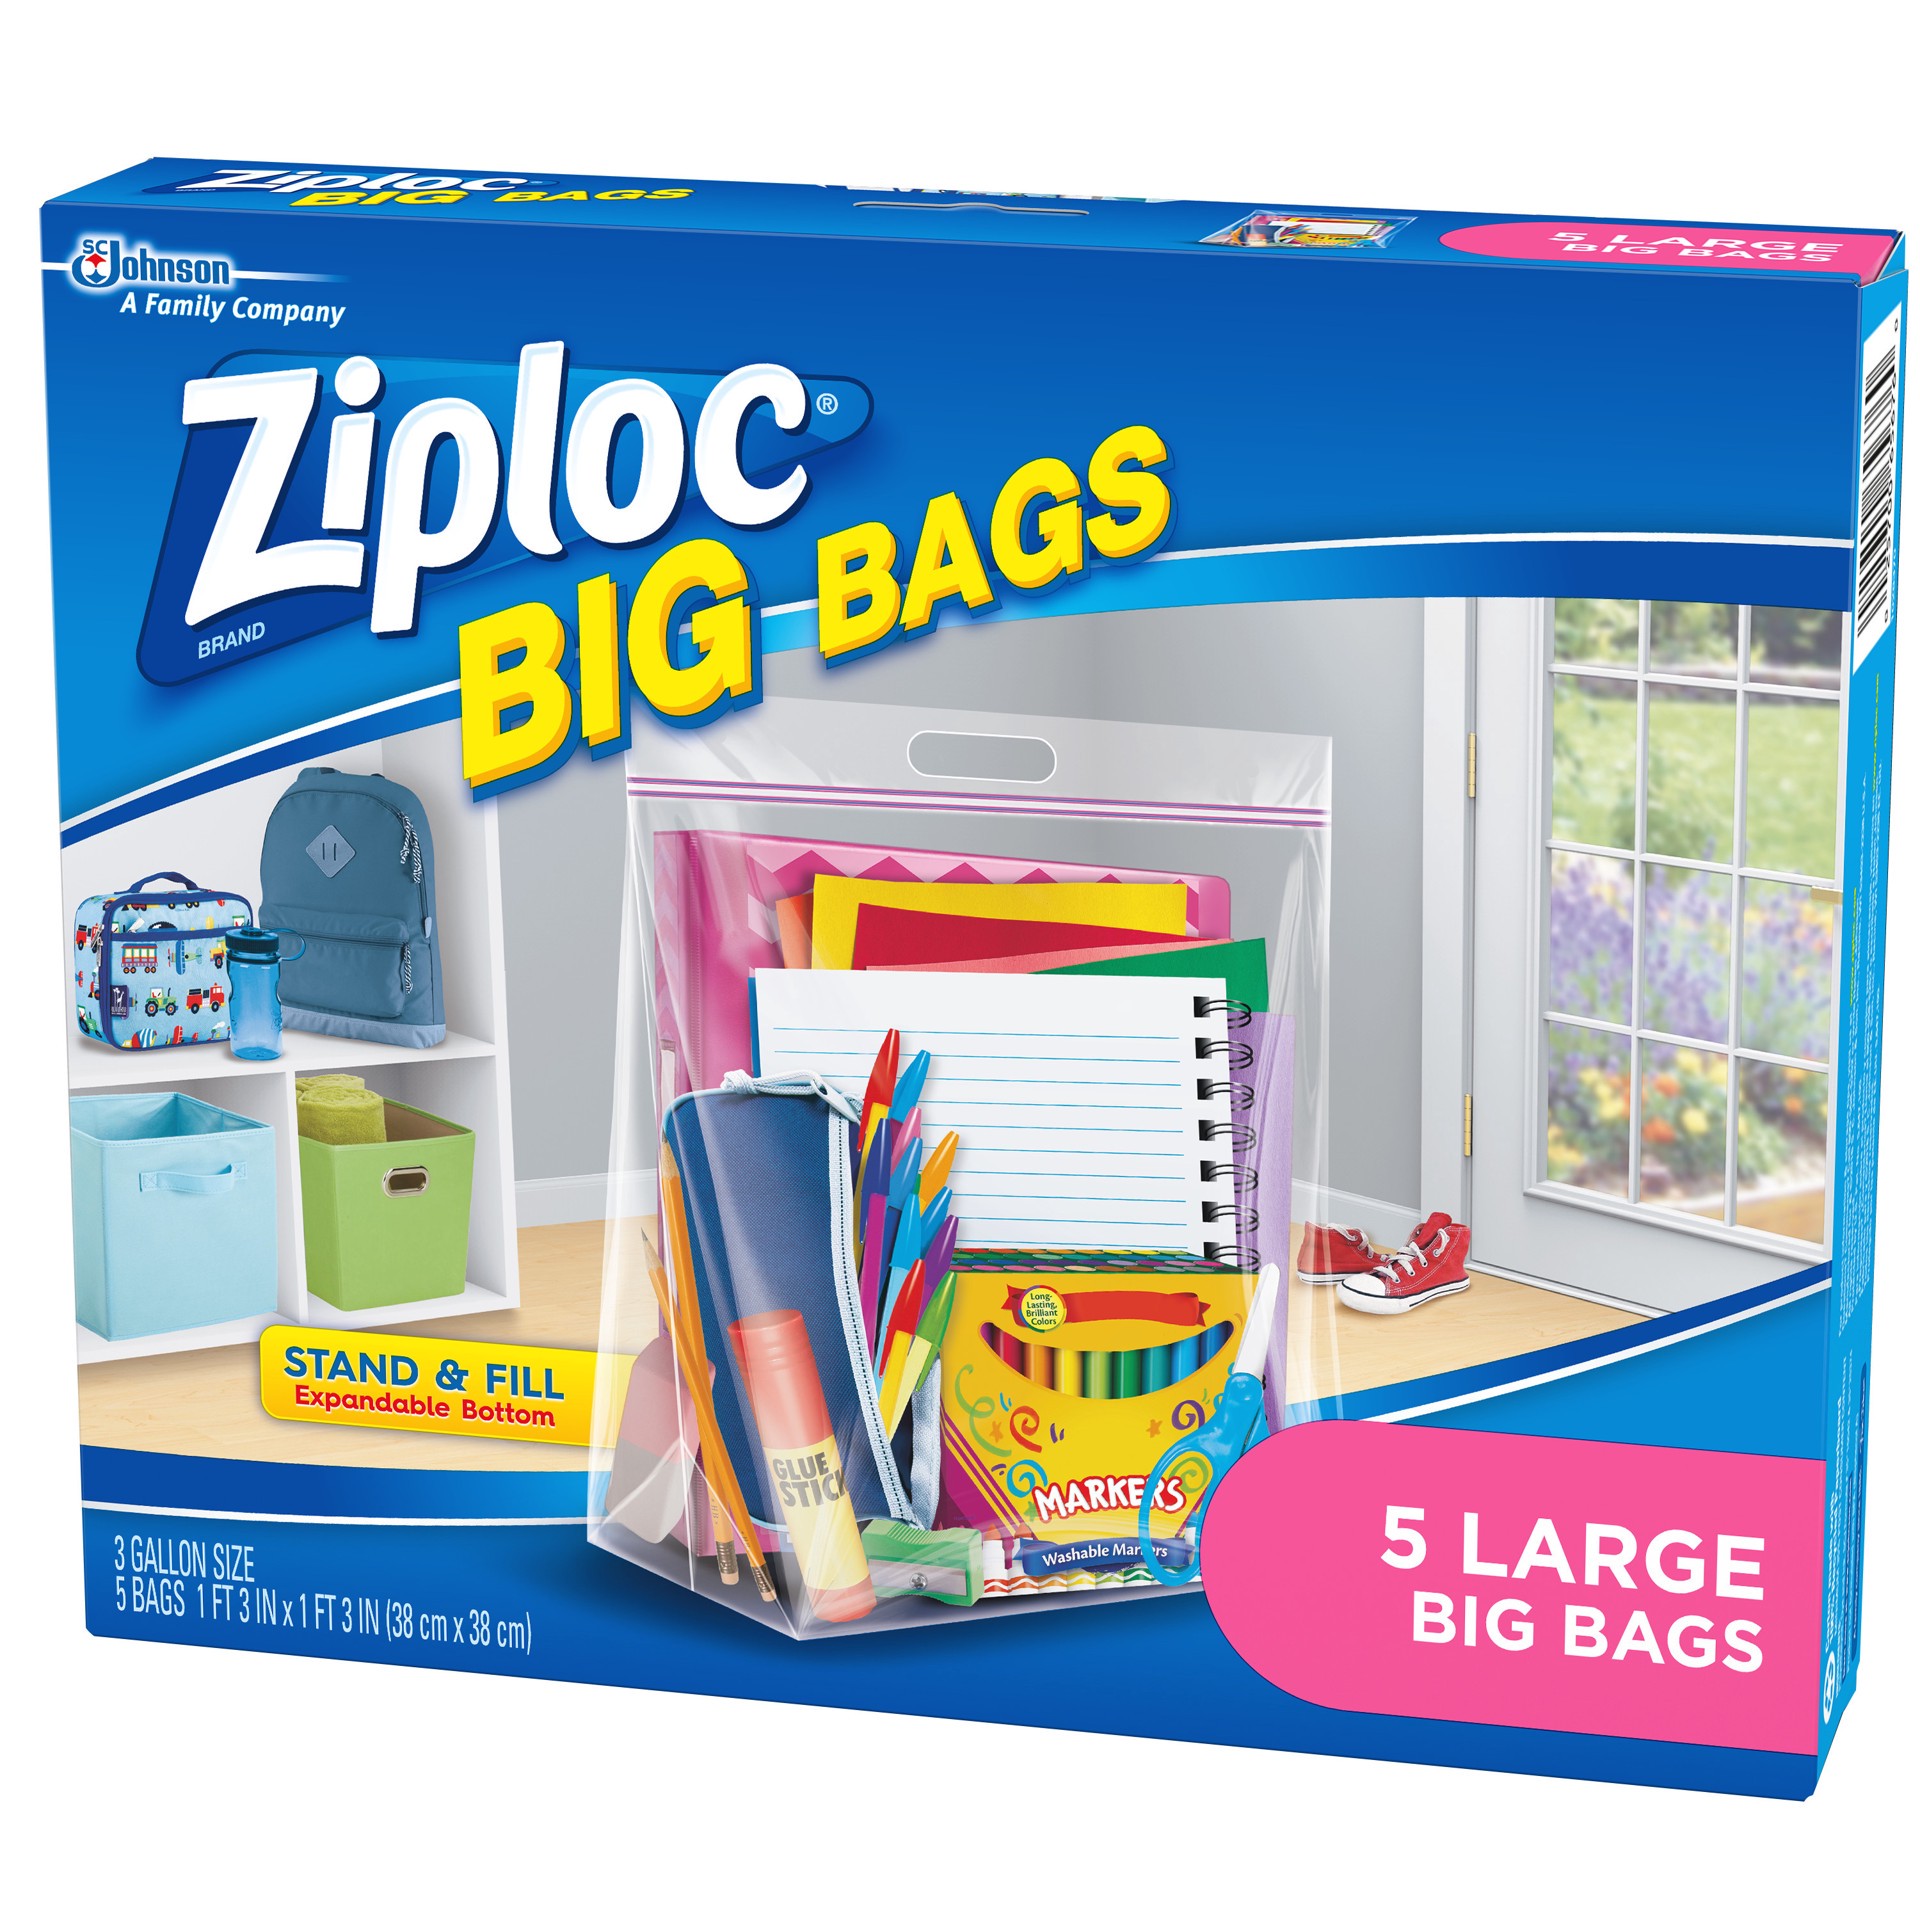 slide 2 of 5, Ziploc Big Bags, Large, Secure Double Zipper, 5 CT,  Expandable Bottom, Heavy-Duty Plastic, Built-In Handles, Flexible Shape to Fit Where Storage Boxes Can't, 5 ct